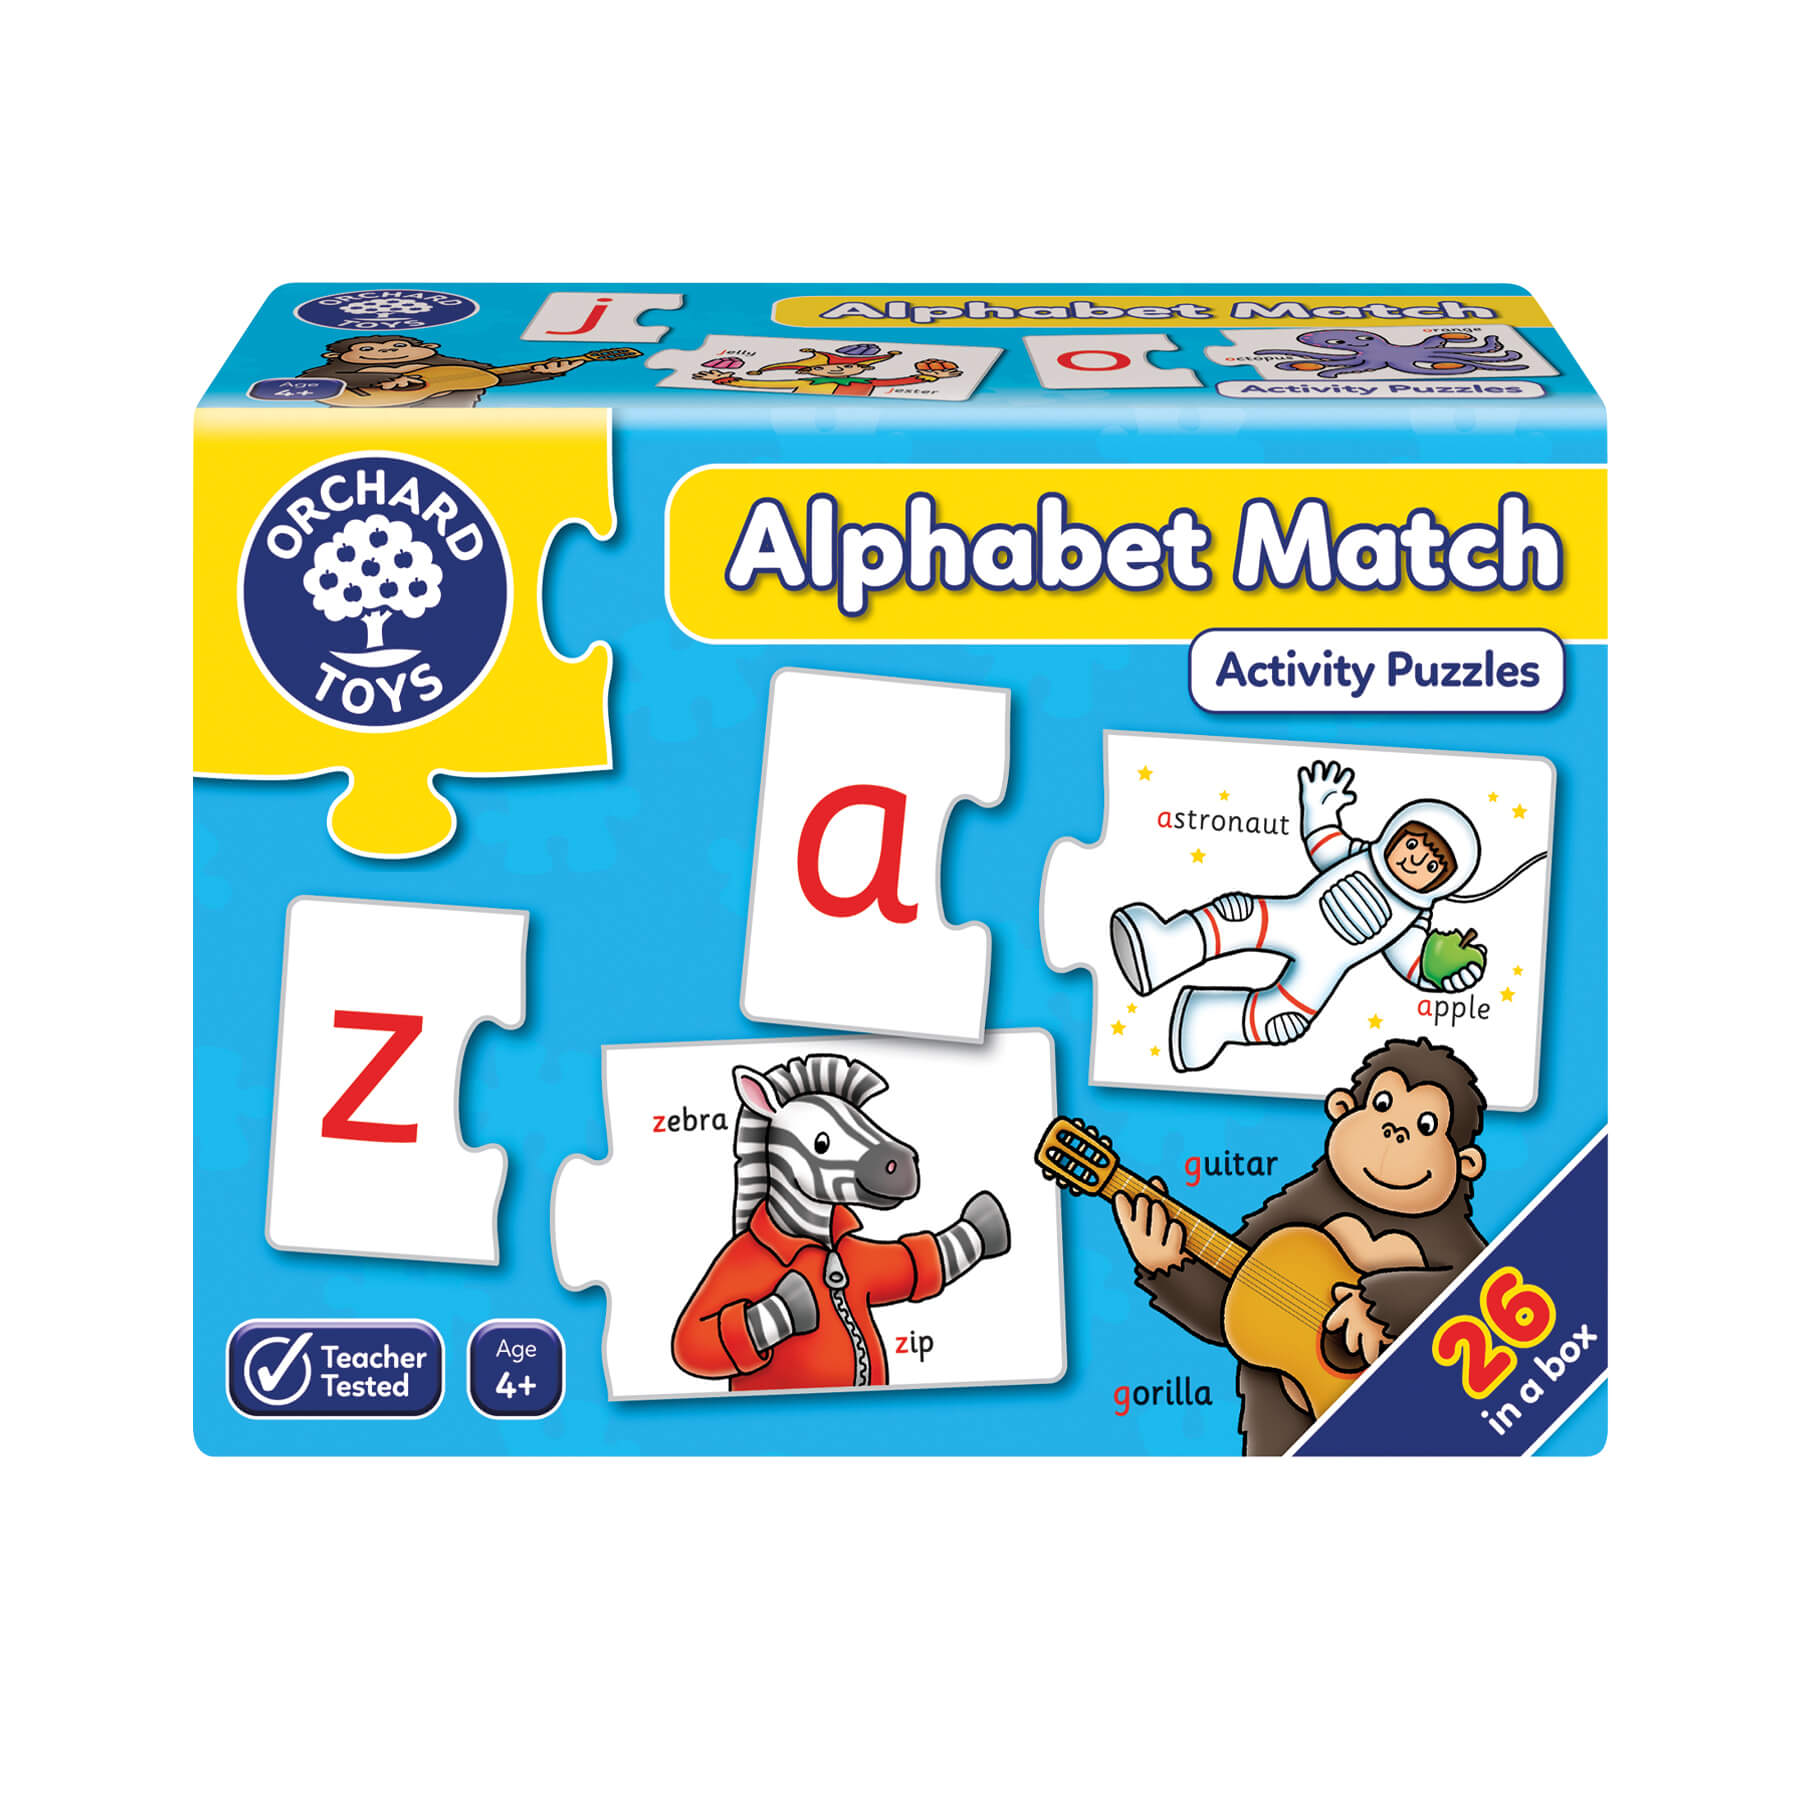 Alphabet Match Kids toys and games - jigsaw puzzles for kids